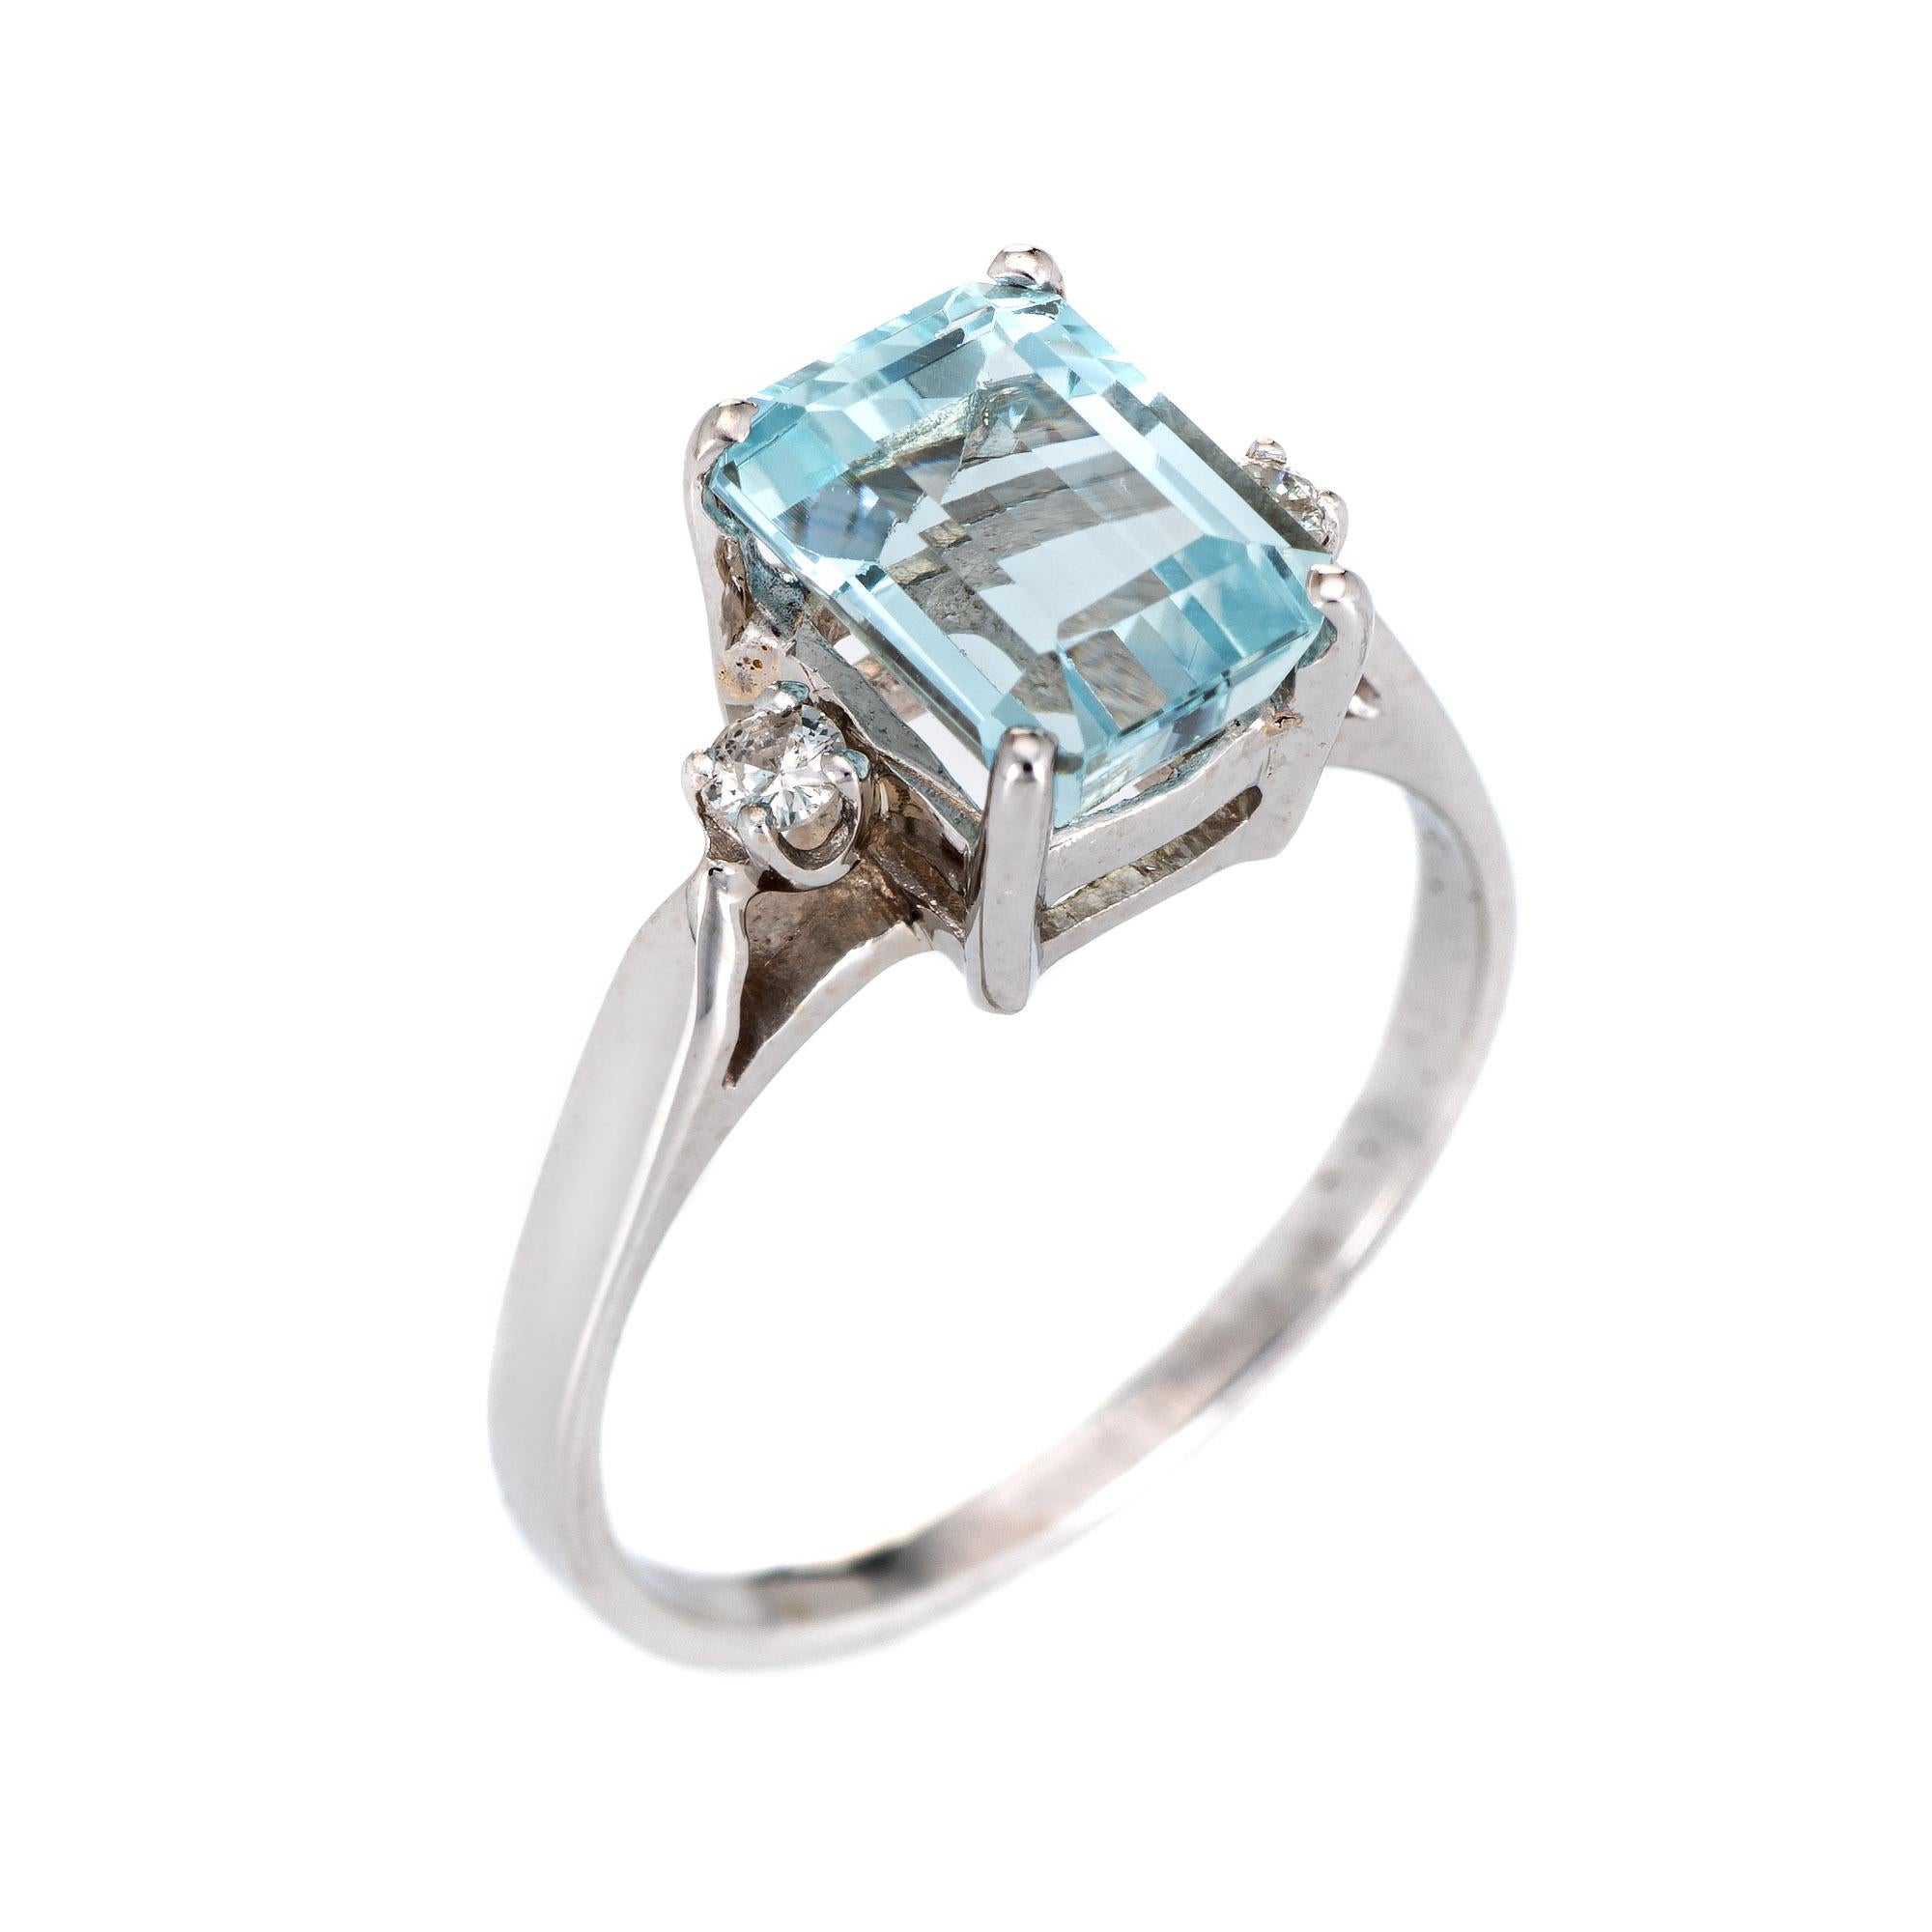 Stylish aquamarine & diamond ring crafted in 14 karat white gold. 

Emerald cut aquamarine measures 8.5mm x 6.5mm (estimated at 2.65 carats), accented with an estimated 0.04 carats of diamonds (estimated at H-I color and SI1-2 clarity). The